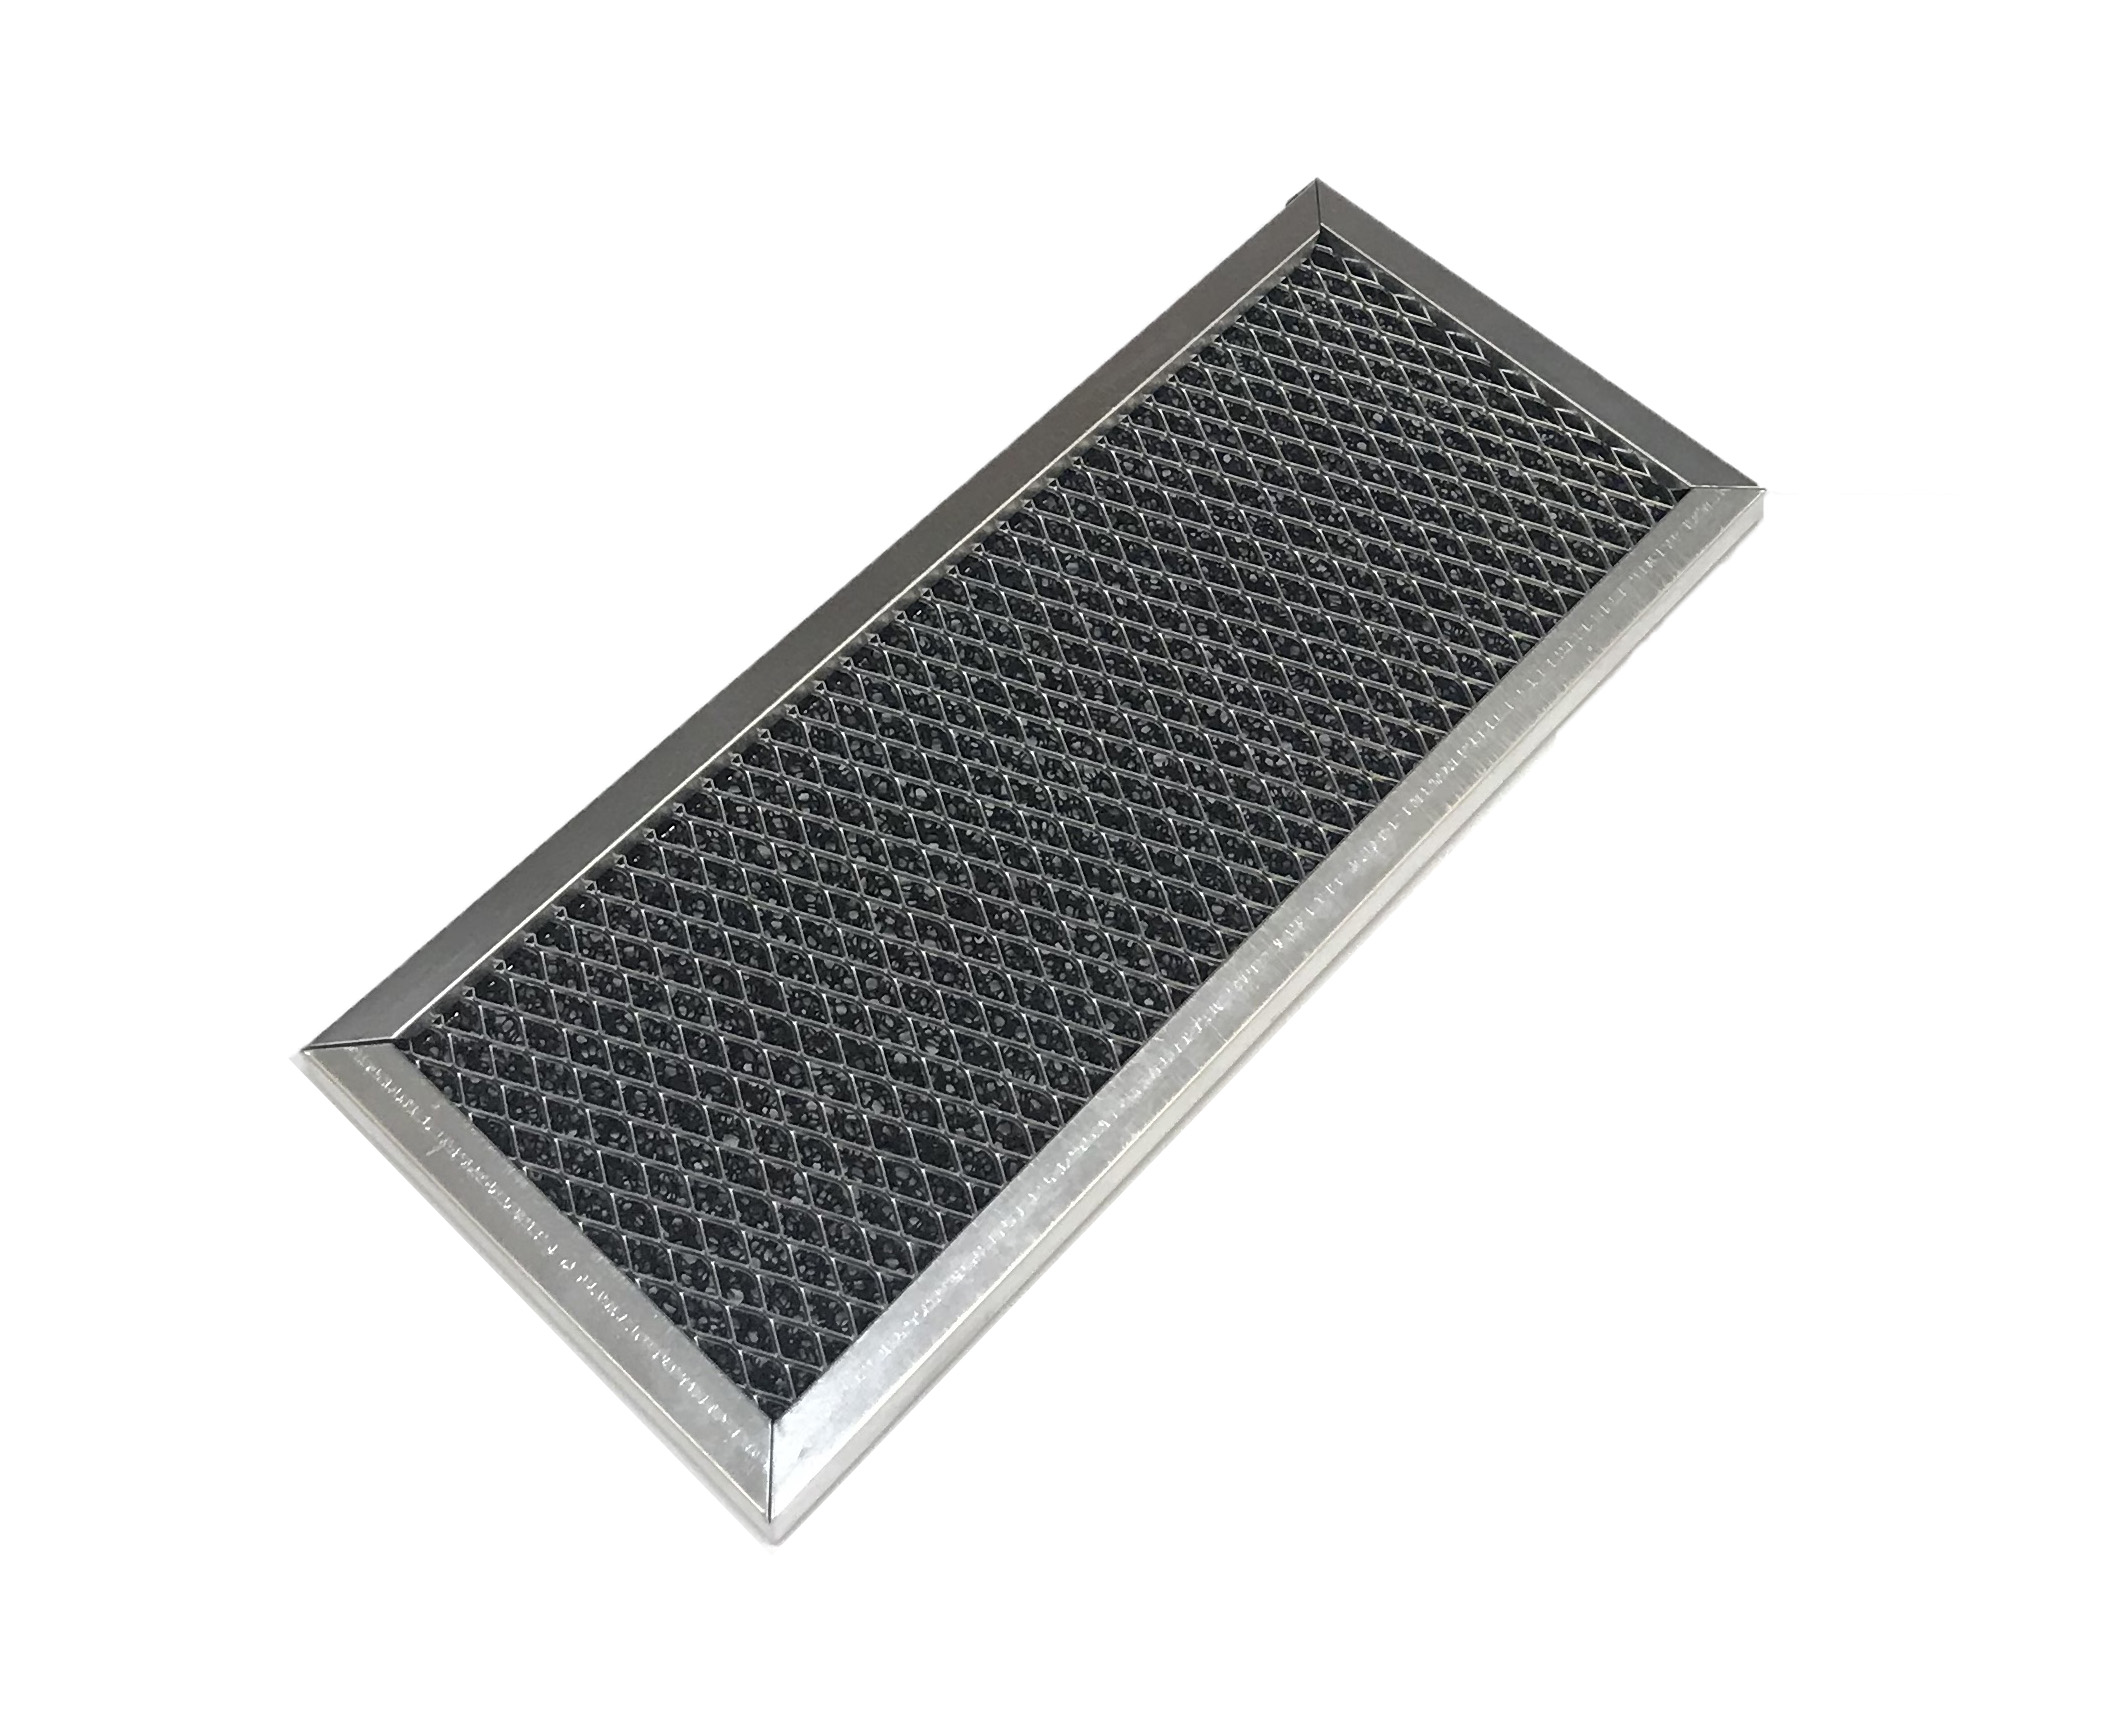 Samsung Microwave Charcoal Air Filter Shipped With SMH7175WE, SMH7175WE/XAA